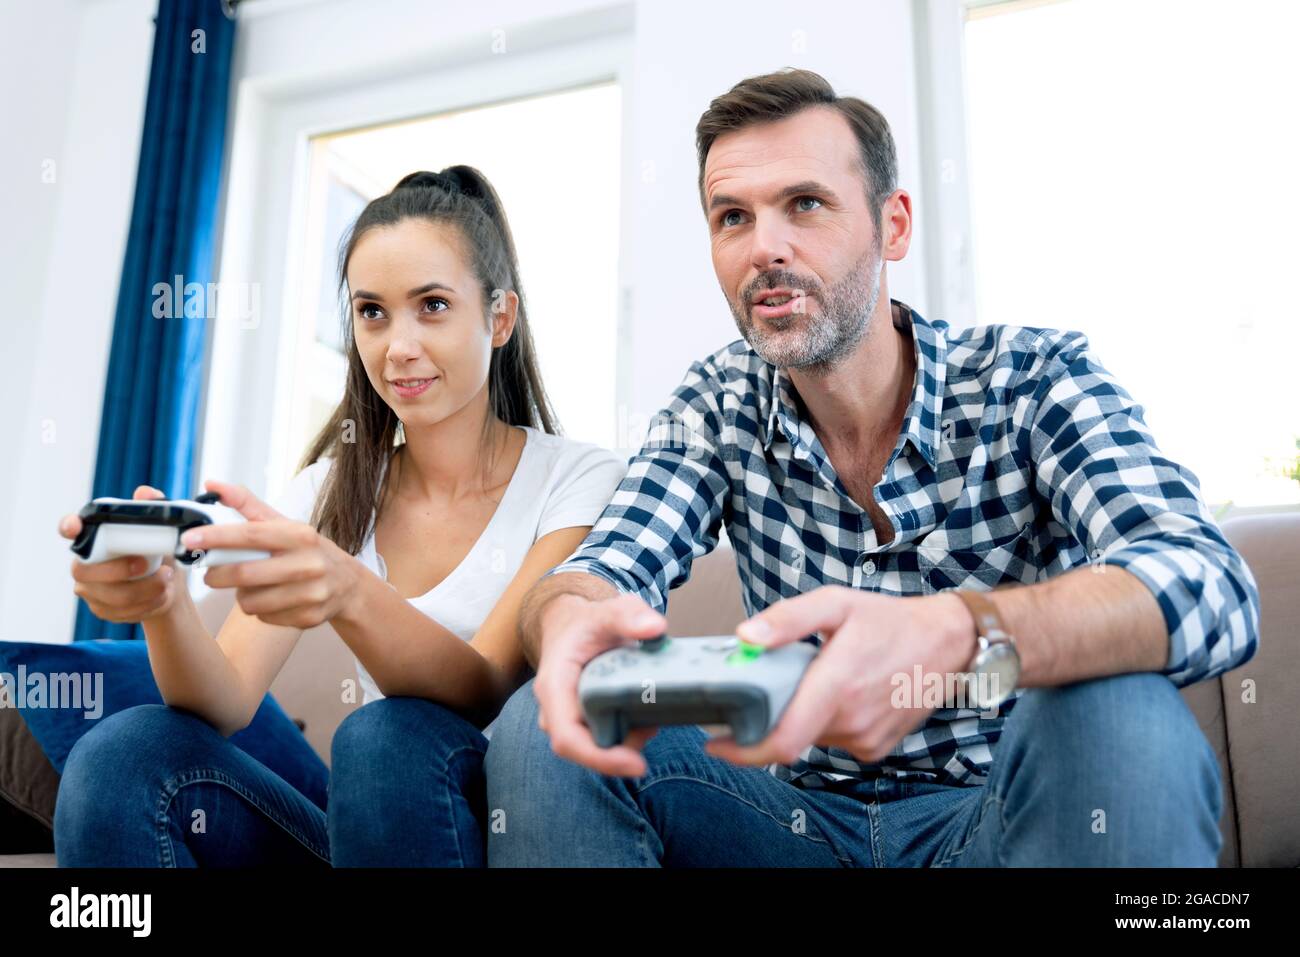 Couple playing computer games, playing the console, holding pads in their hands Stock Photo